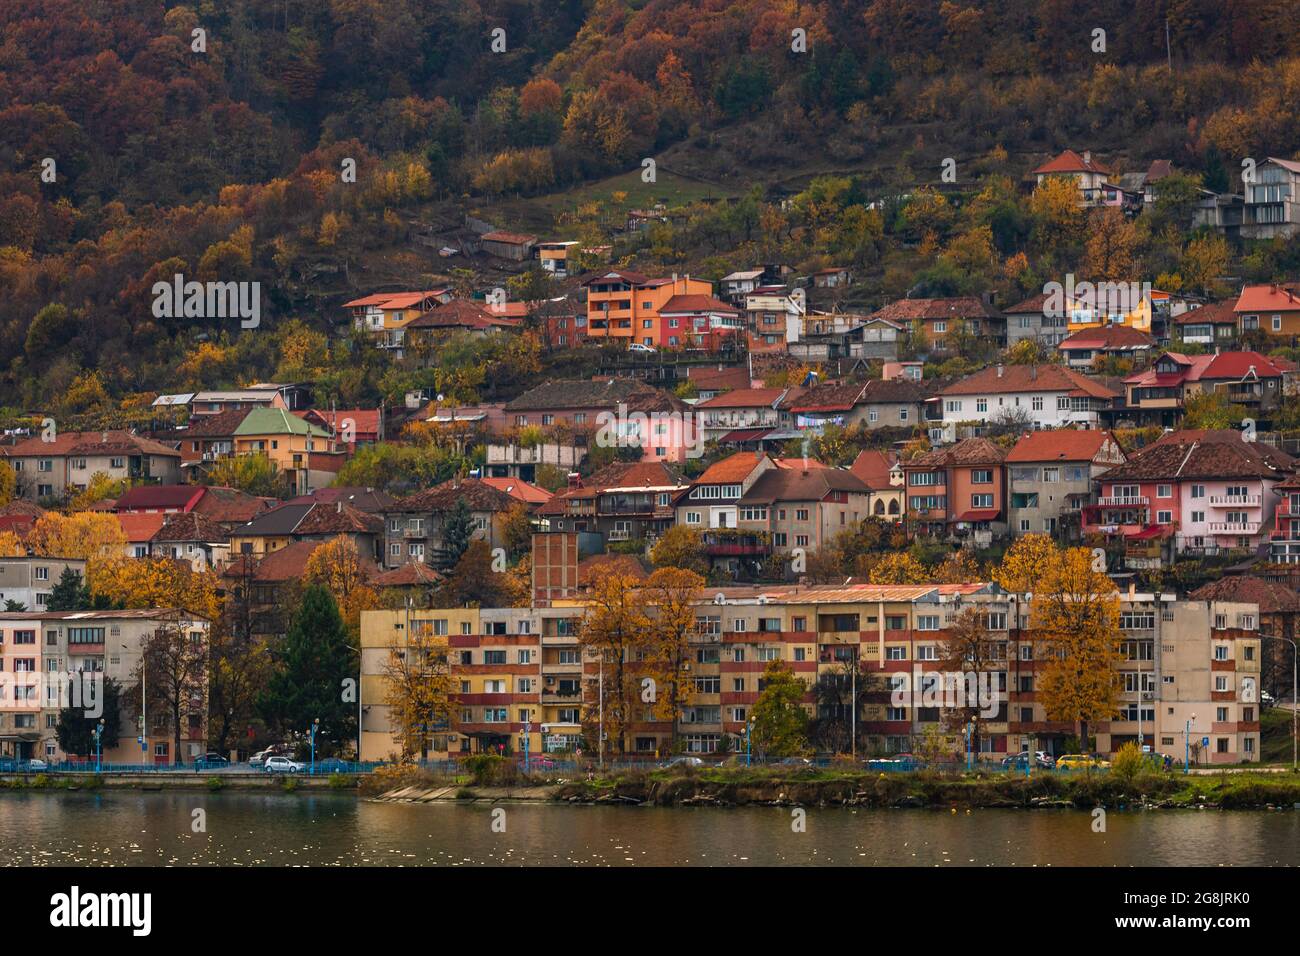 View of Danube river and Orsova city trees and buildings in Orsova, Romania Stock Photo